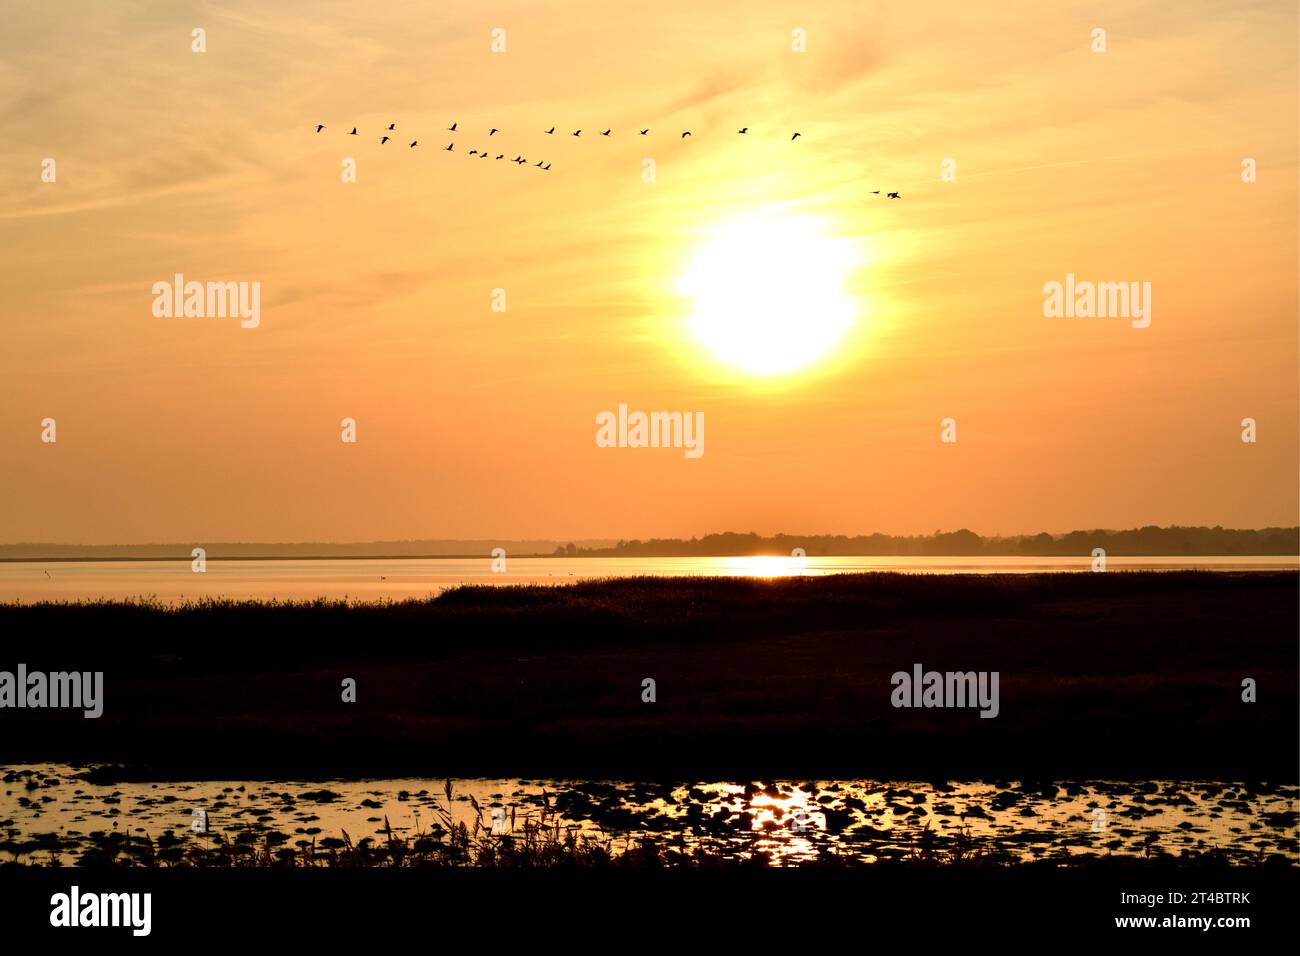 Silhouettes of flock of cranes flying into orange glowing sunset above big yellow sun ball over calm Baltic Sea peninsula in Germany during low tide Stock Photo